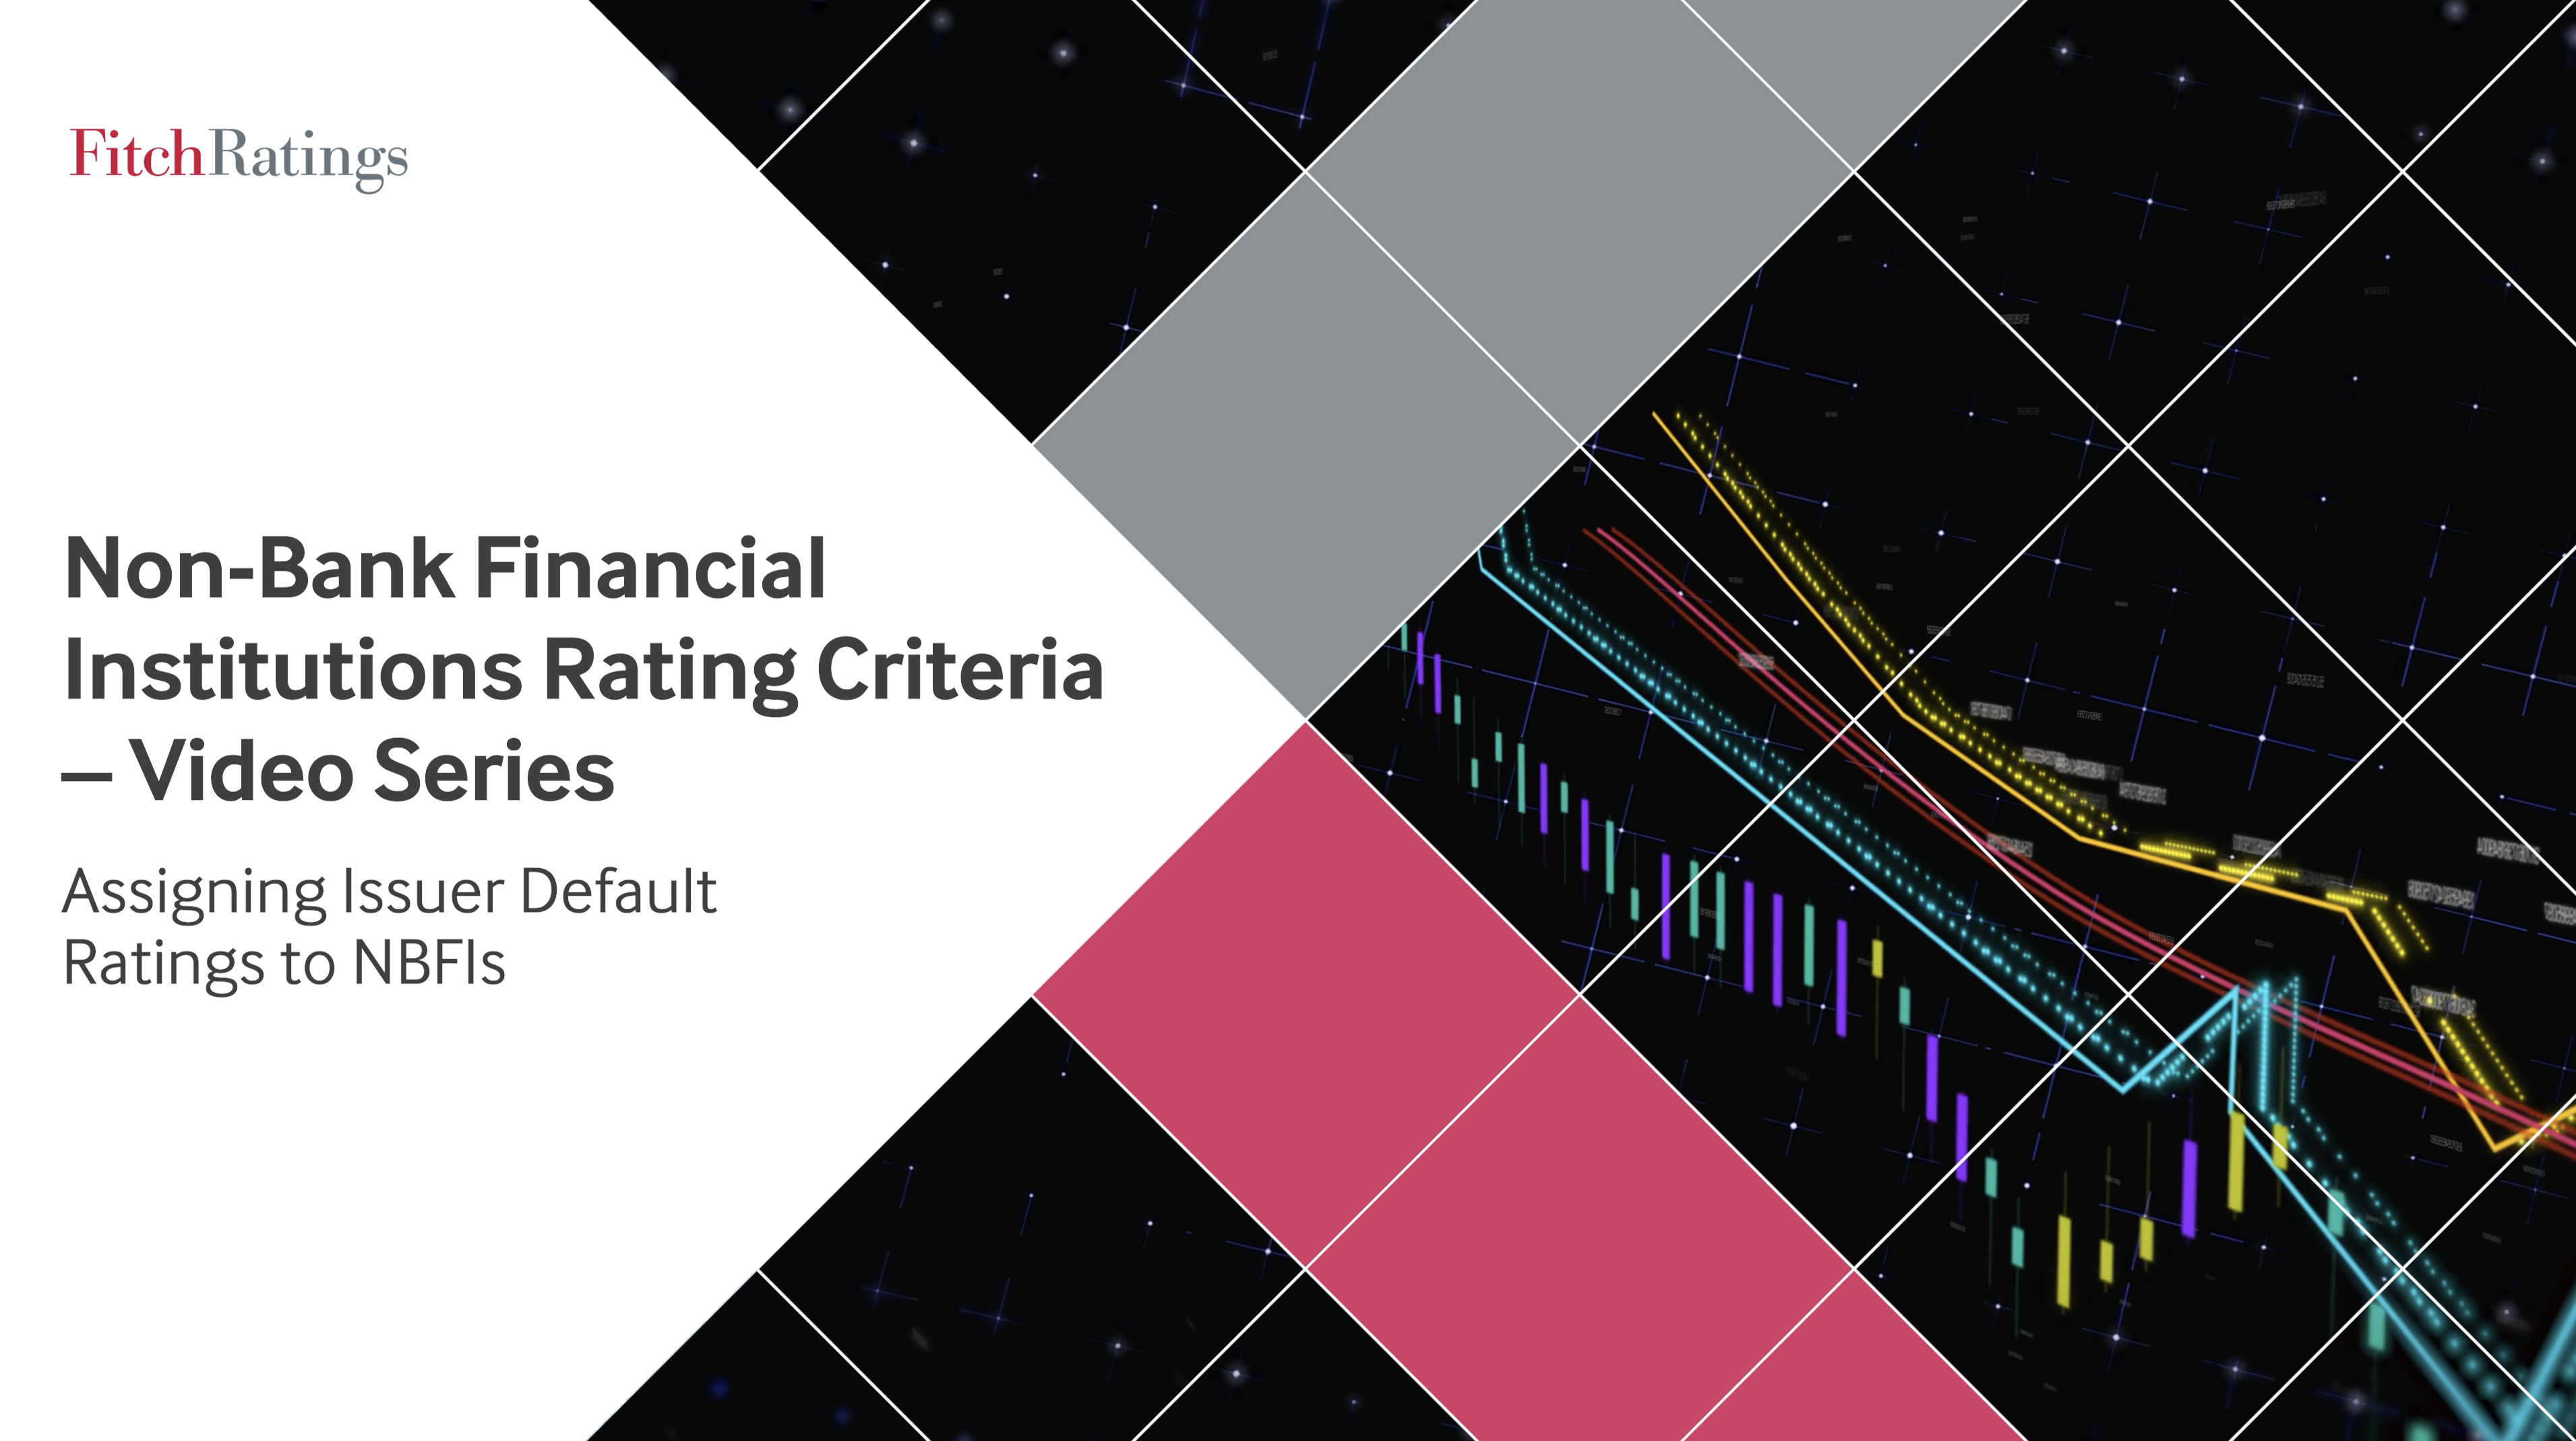 Non-Bank Financial Institutions Rating Criteria - Assigning Issuer Default Ratings (Part 2 of 3)